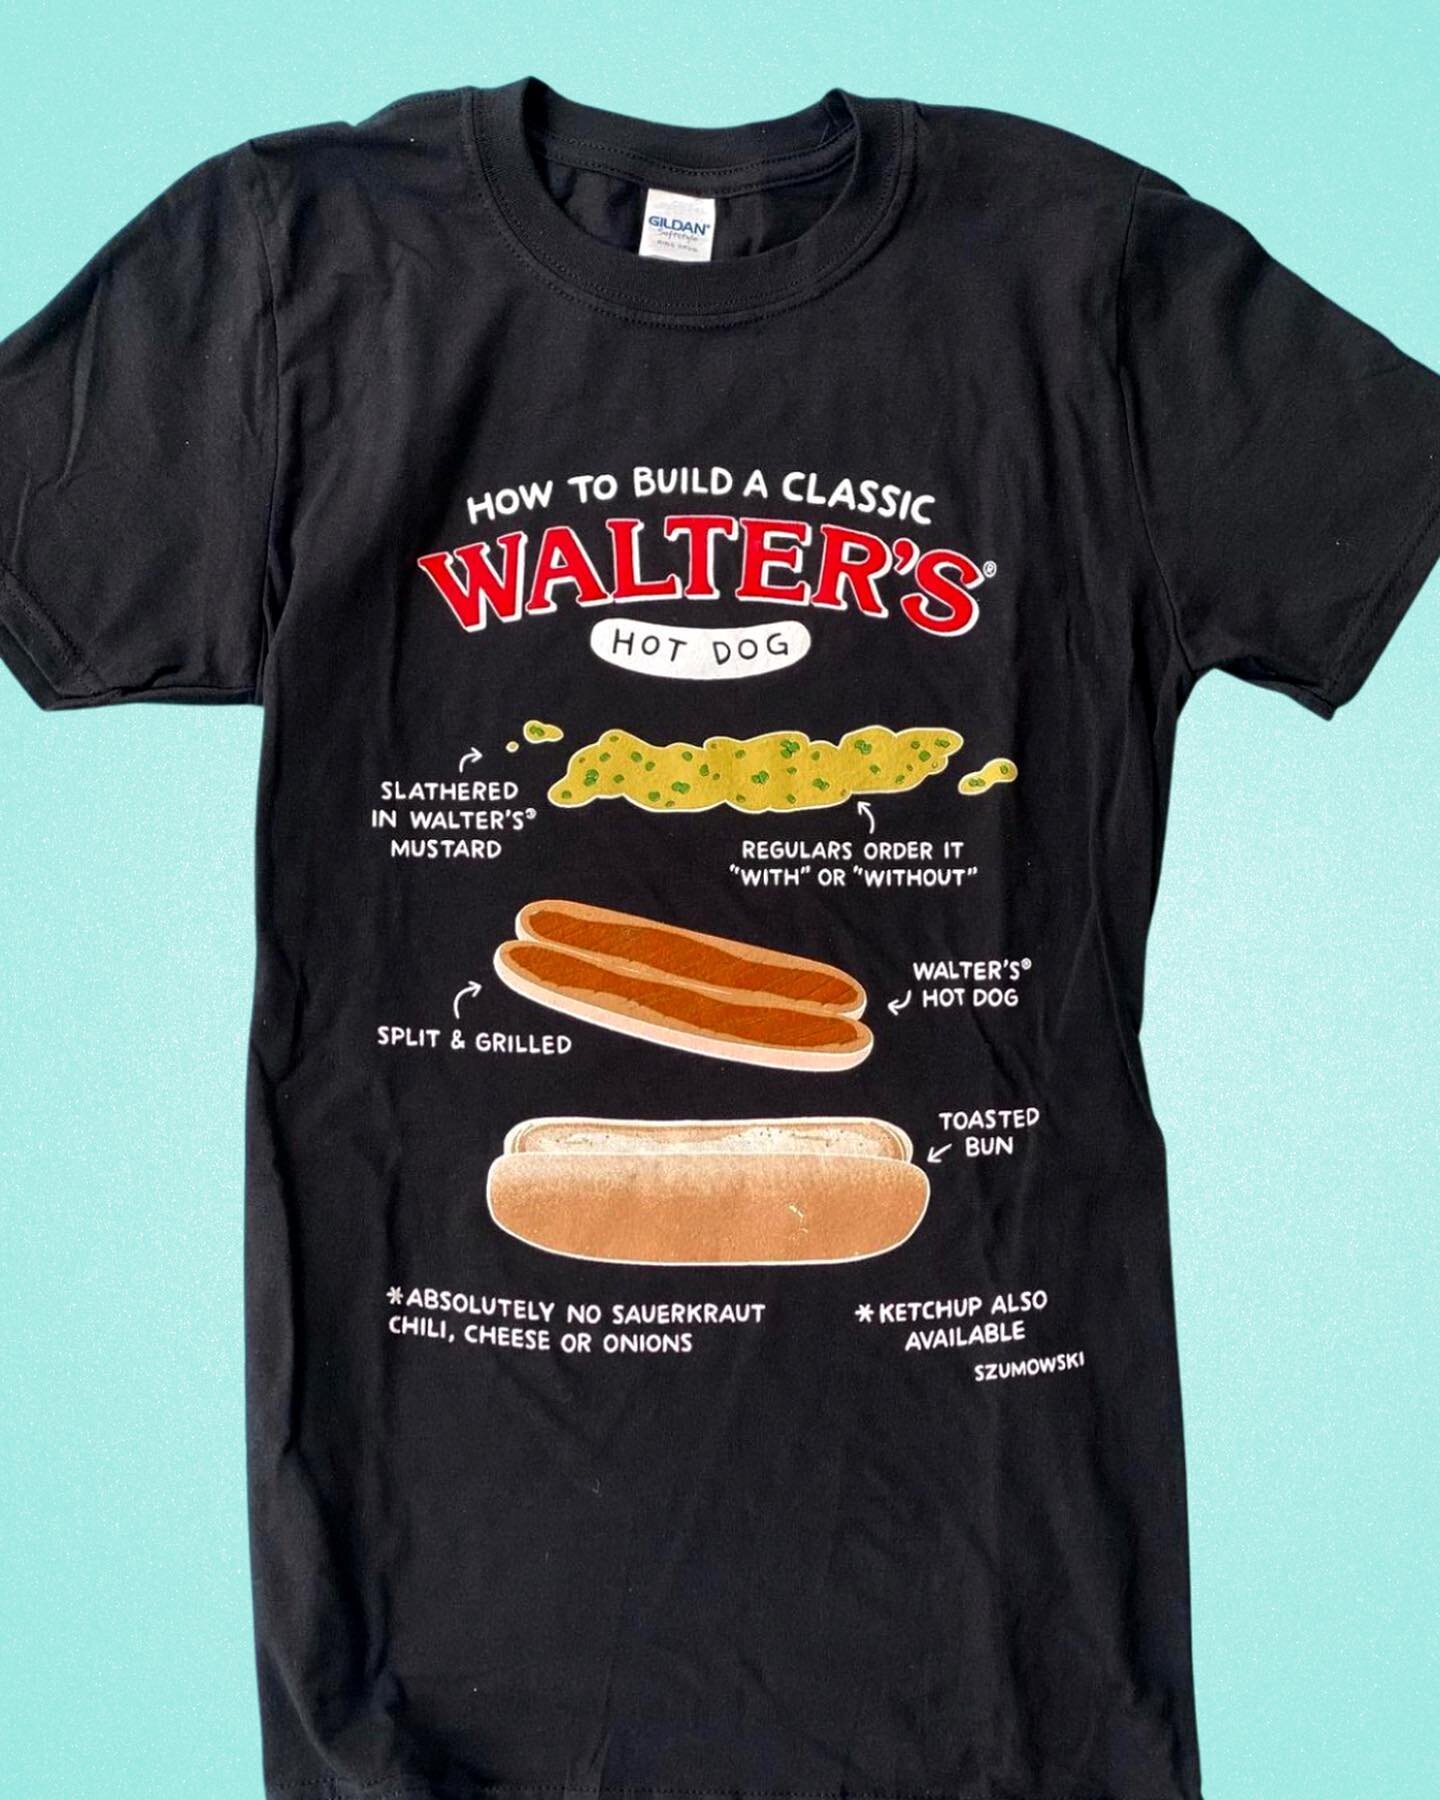 Walter&rsquo;s has just what your favorite student needs to keep them warm and powered through the school year! 🤗 Make sure your next care package includes a taste of home with Walter&rsquo;s merch and products! SWIPE 👉🏽 through to view the many o